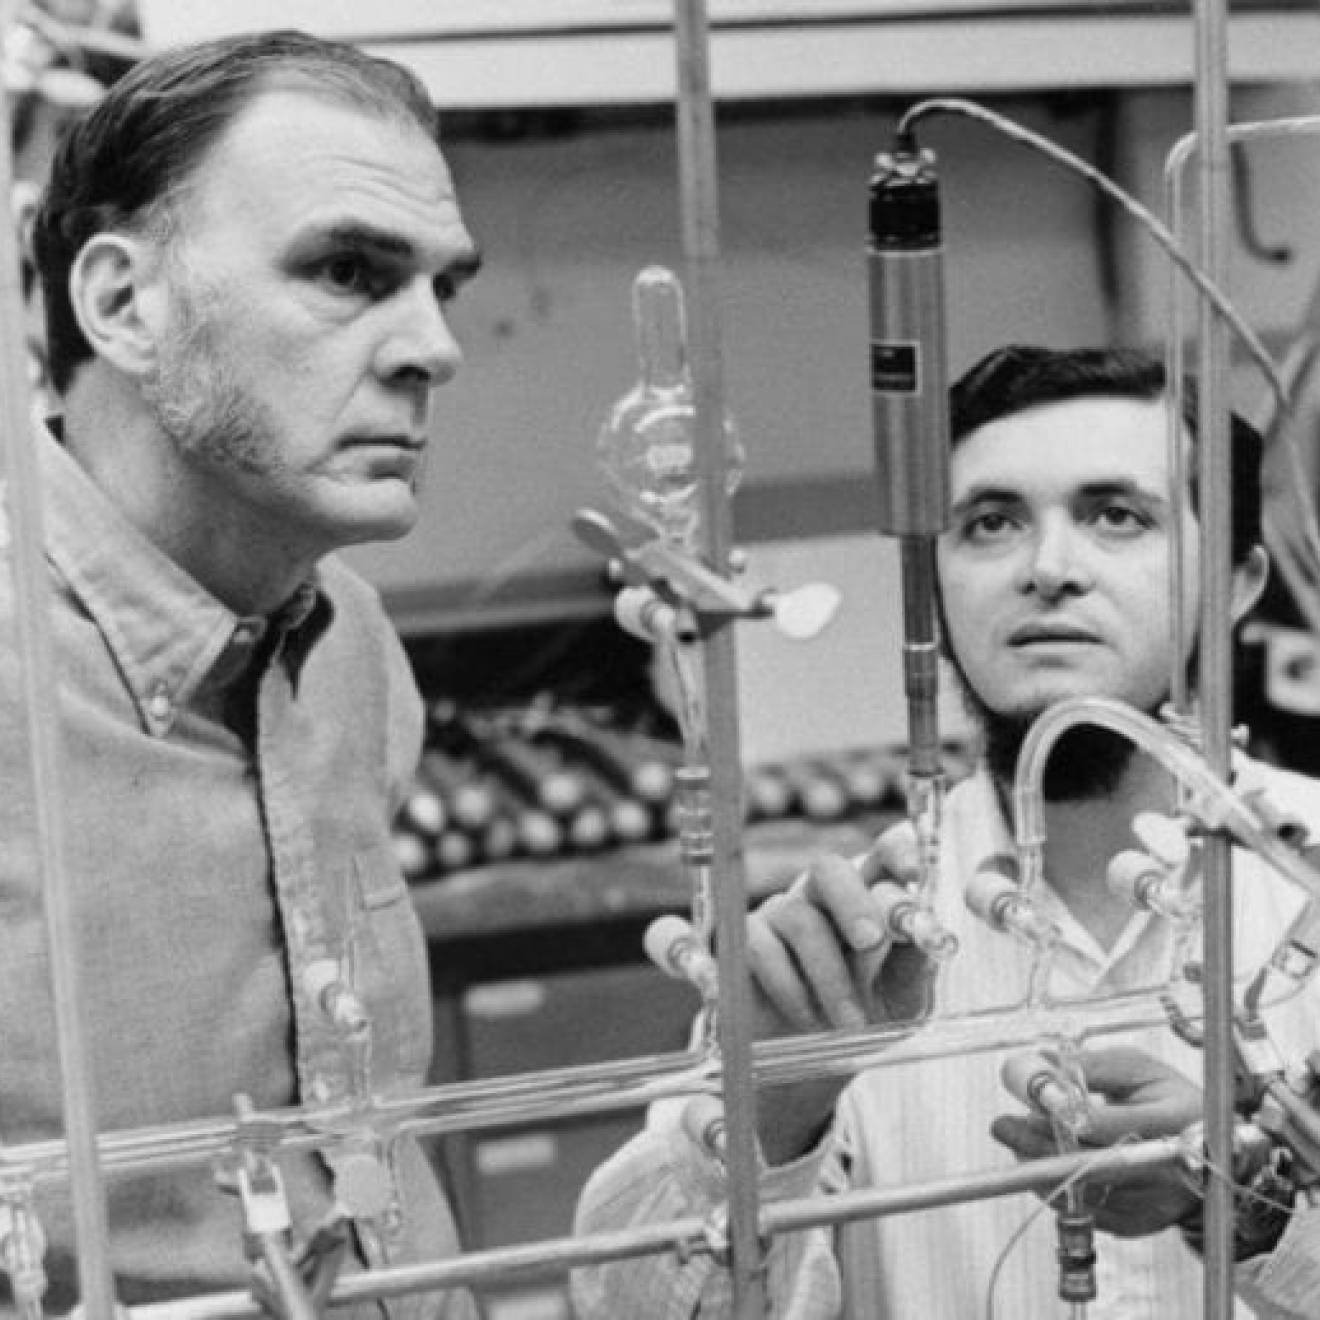 F. Sherwood Rowland and Mario Molina in their lab at UC Irvine in the early 1970s,